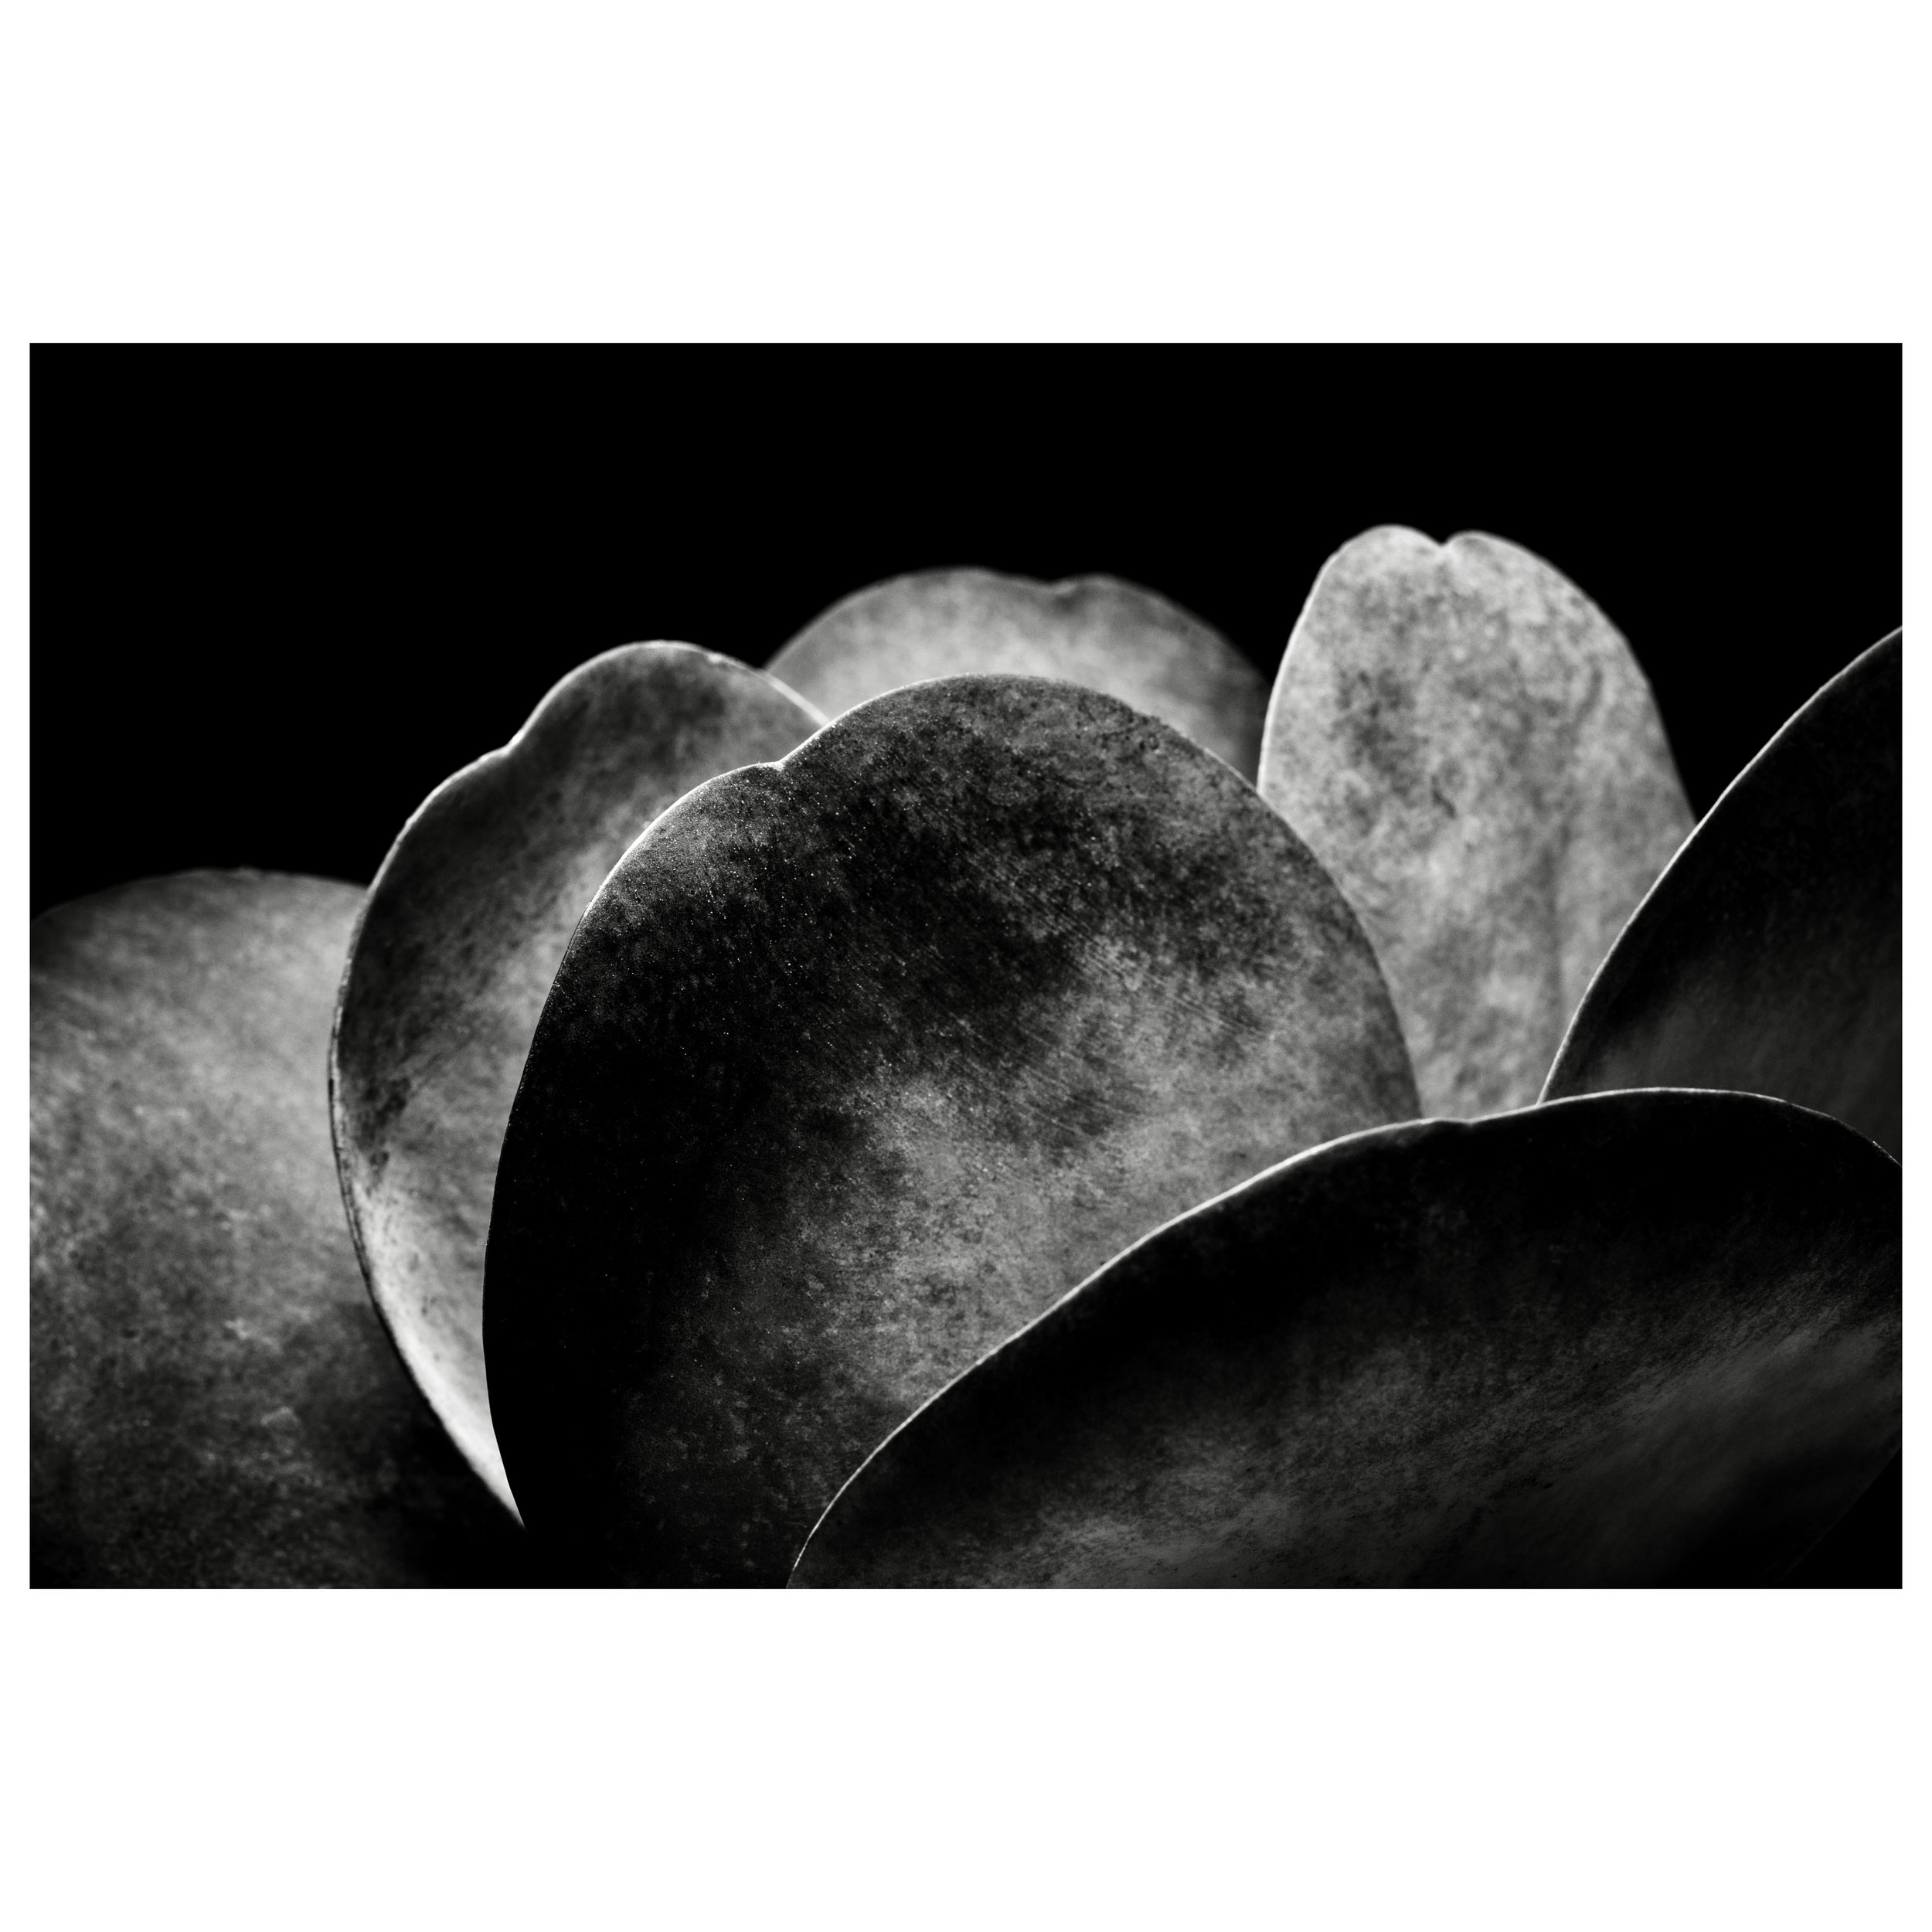 Exploring the exquisite curves and velvety gradients of nature&rsquo;s sculptures. 
-
#blackandwhitephotography #fineartphotography #blackandwhiteprints #plantart #artcollector #studiophotography #lisastonephotography #foothillcollegephoto #bnw_and_n